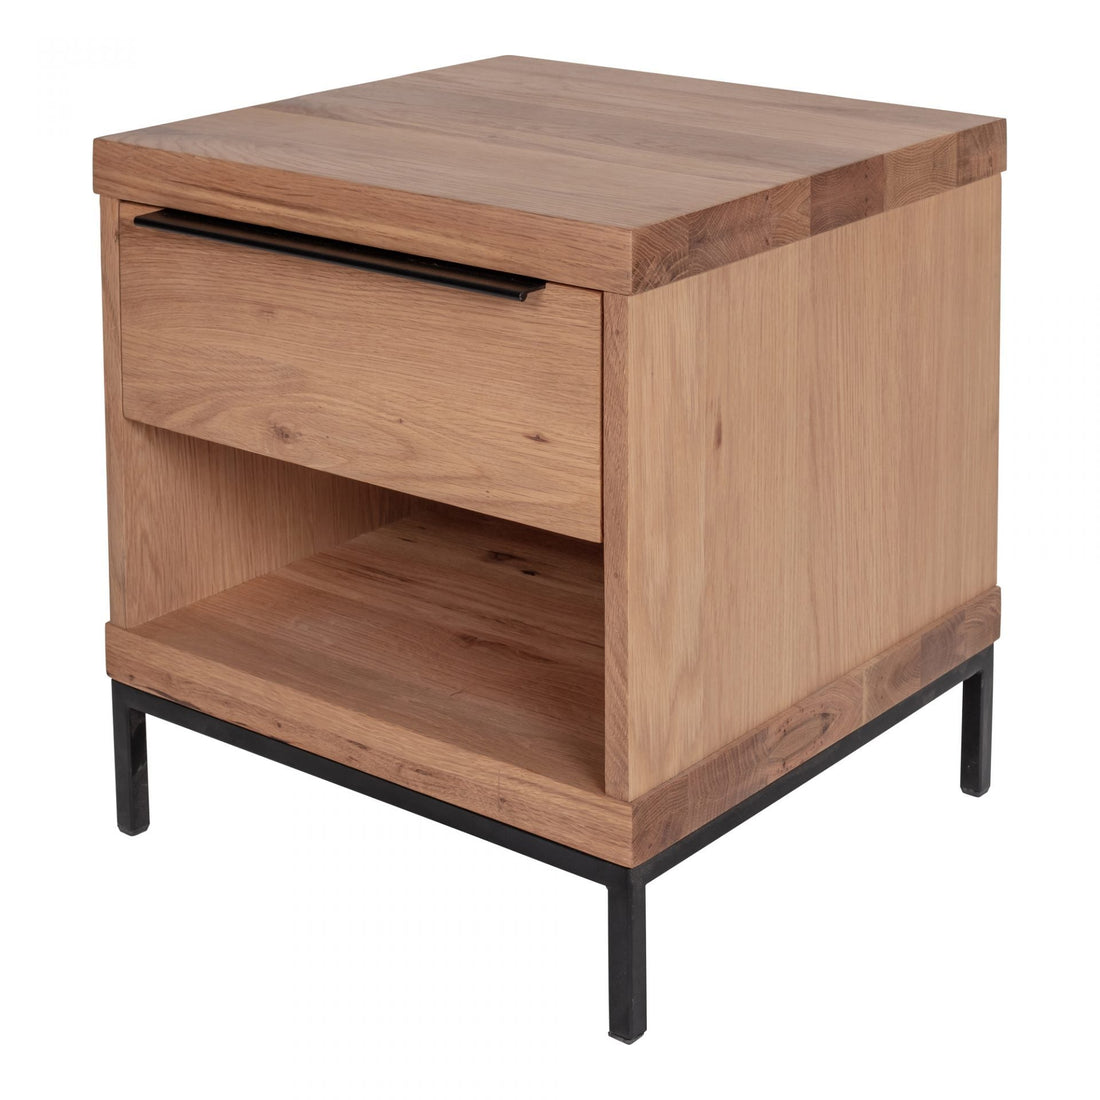 Montego One-Drawer Nightstand: Sleek Storage by Your Bedside